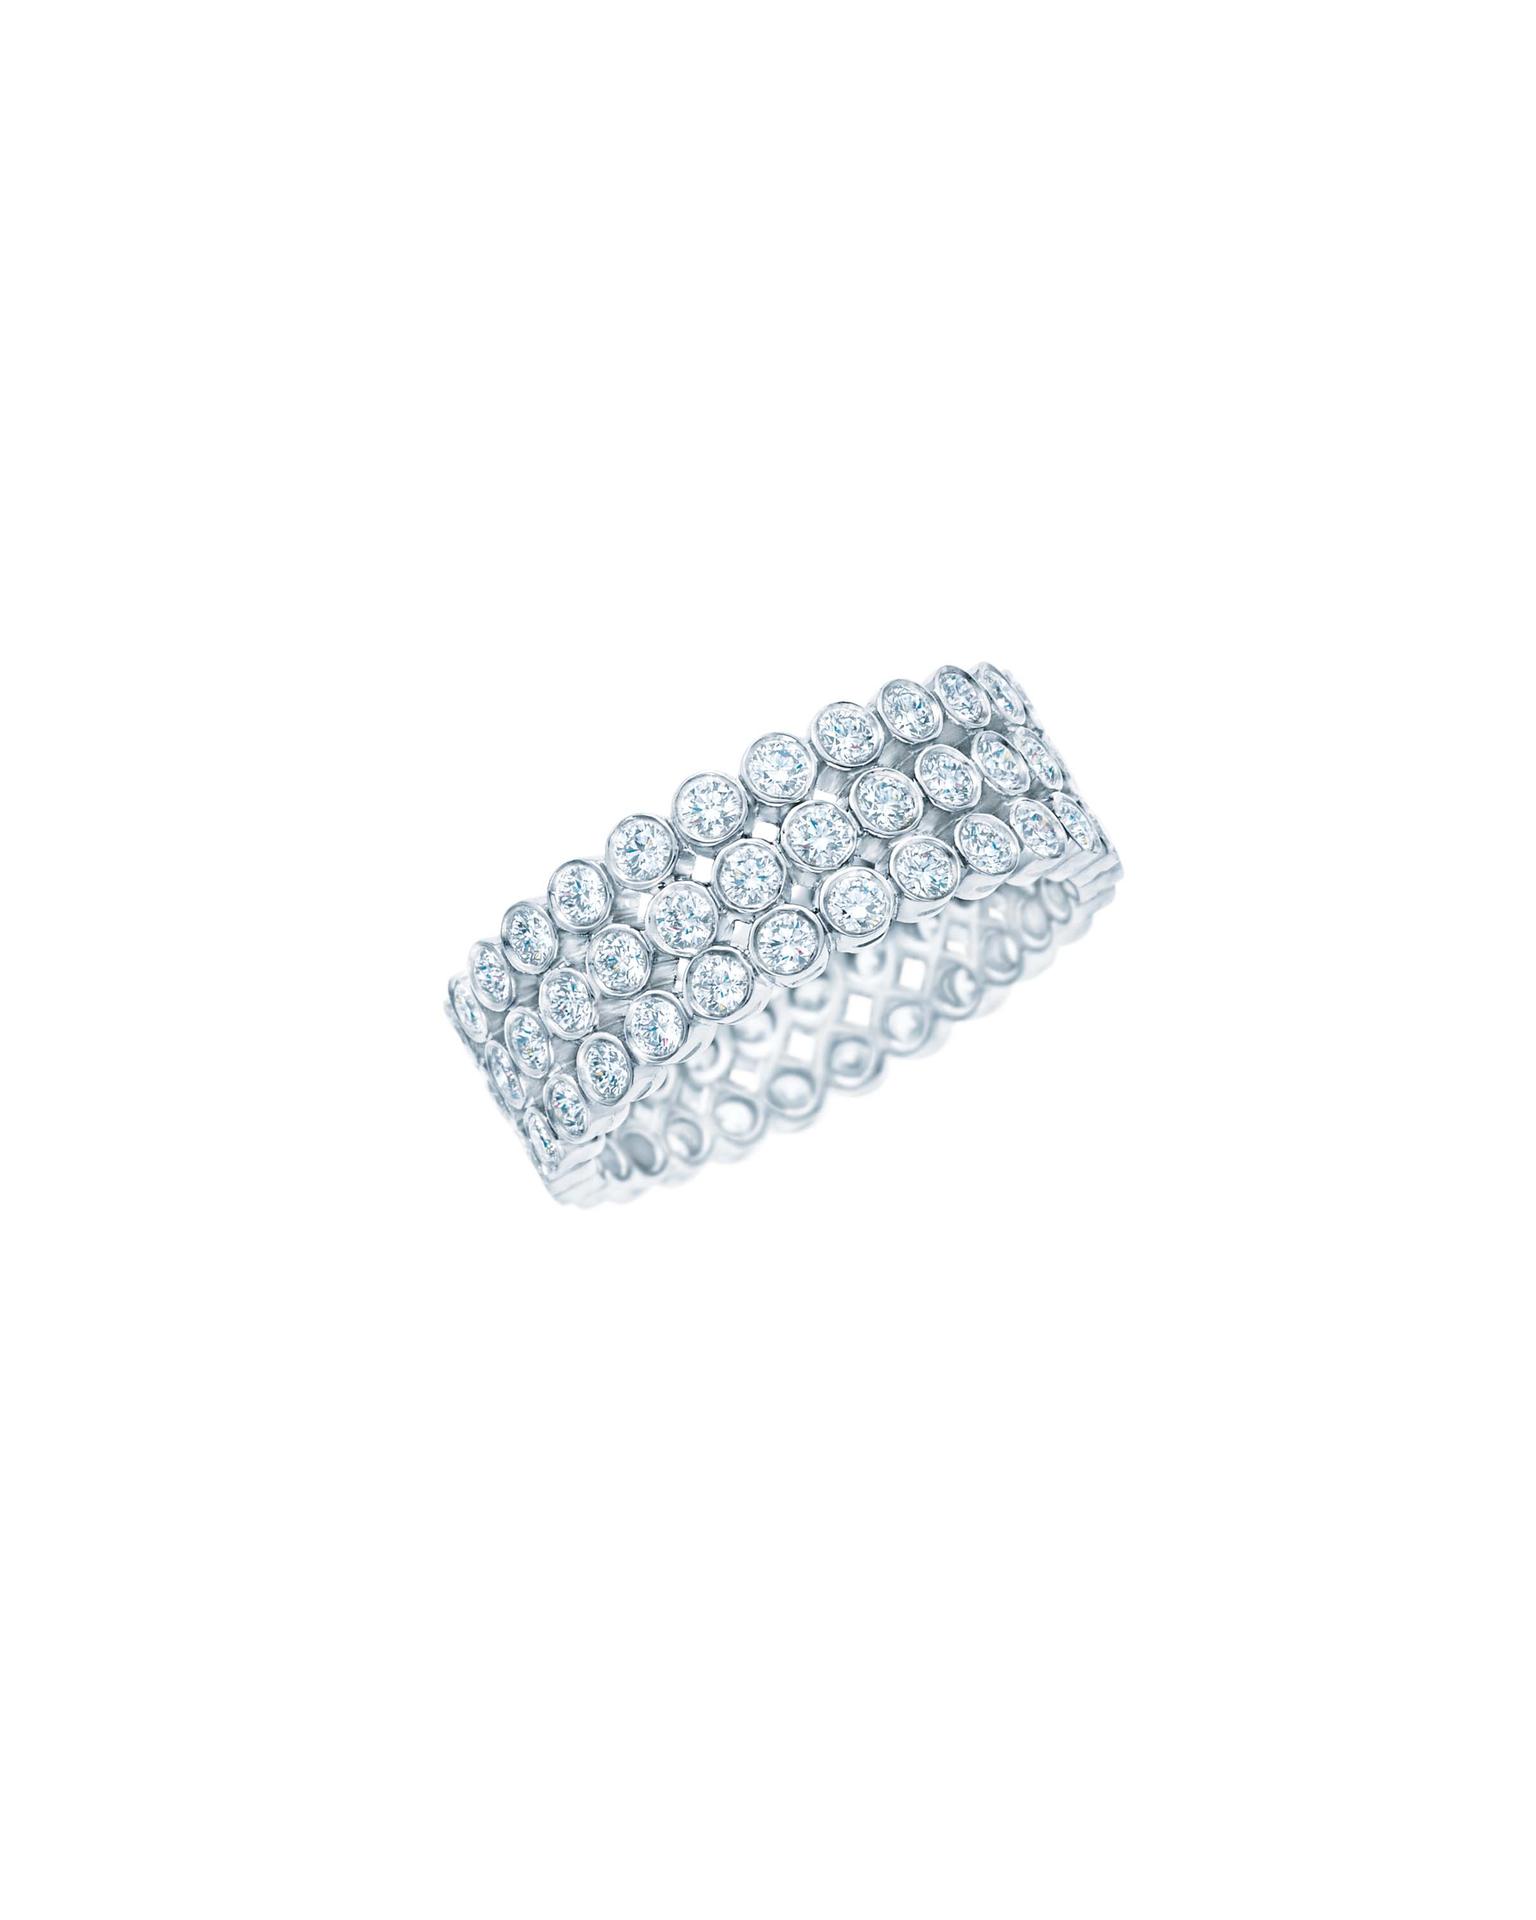 Tiffany Jazz ring with three rows of diamonds in platinum from £7,900.